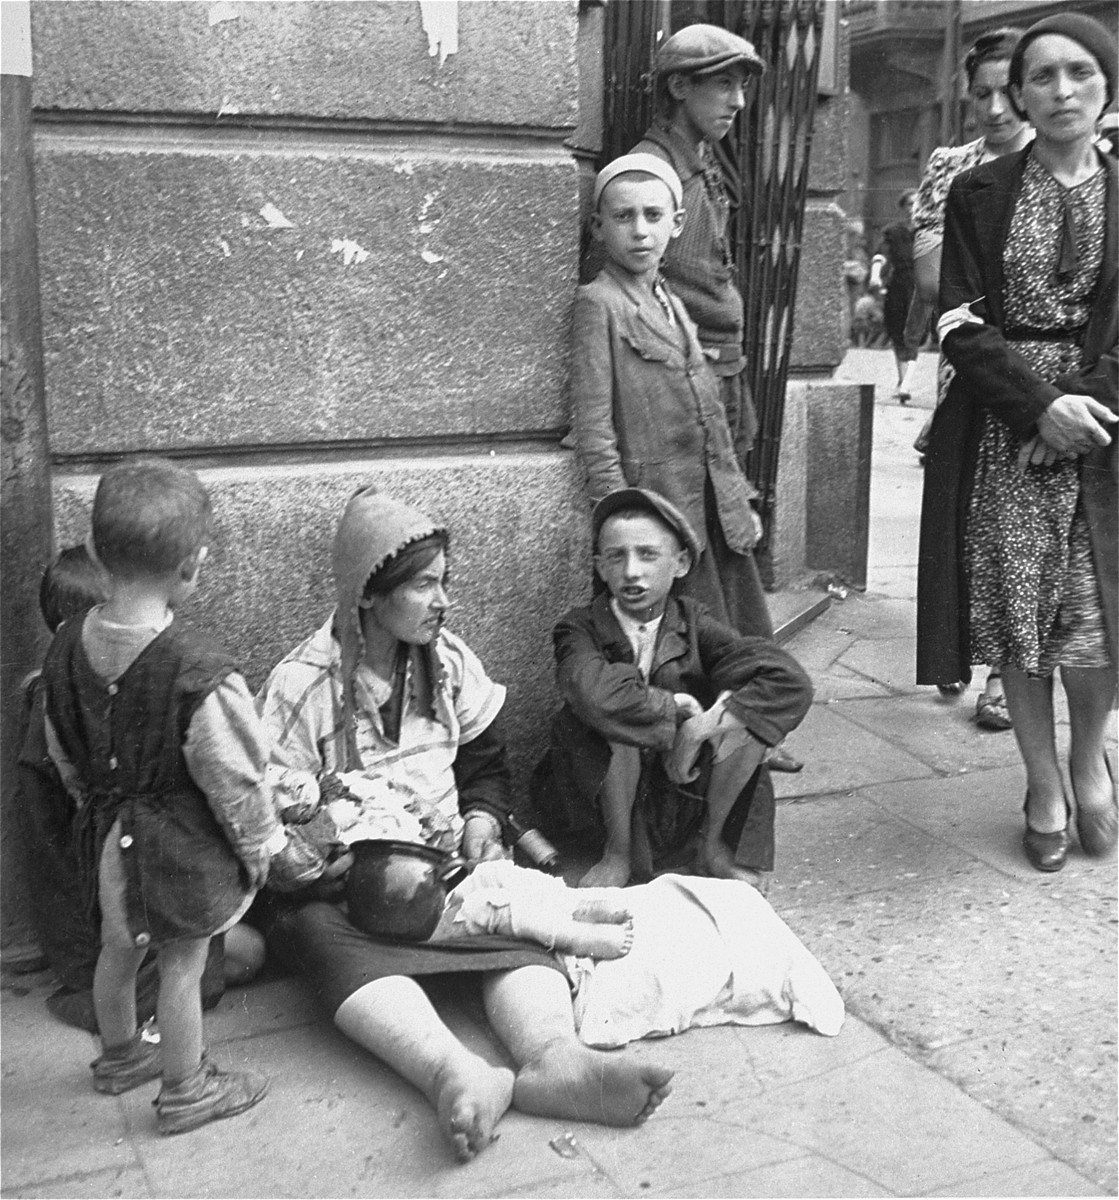 A destitute woman and her children on a street in the Warsaw ghetto.  

Joest's original caption reads: "This was a common sight and I had reservations about photographing it: a woman with child that was deathly ill, [who] sat barefoot and begging on the street.  She did not notice me."